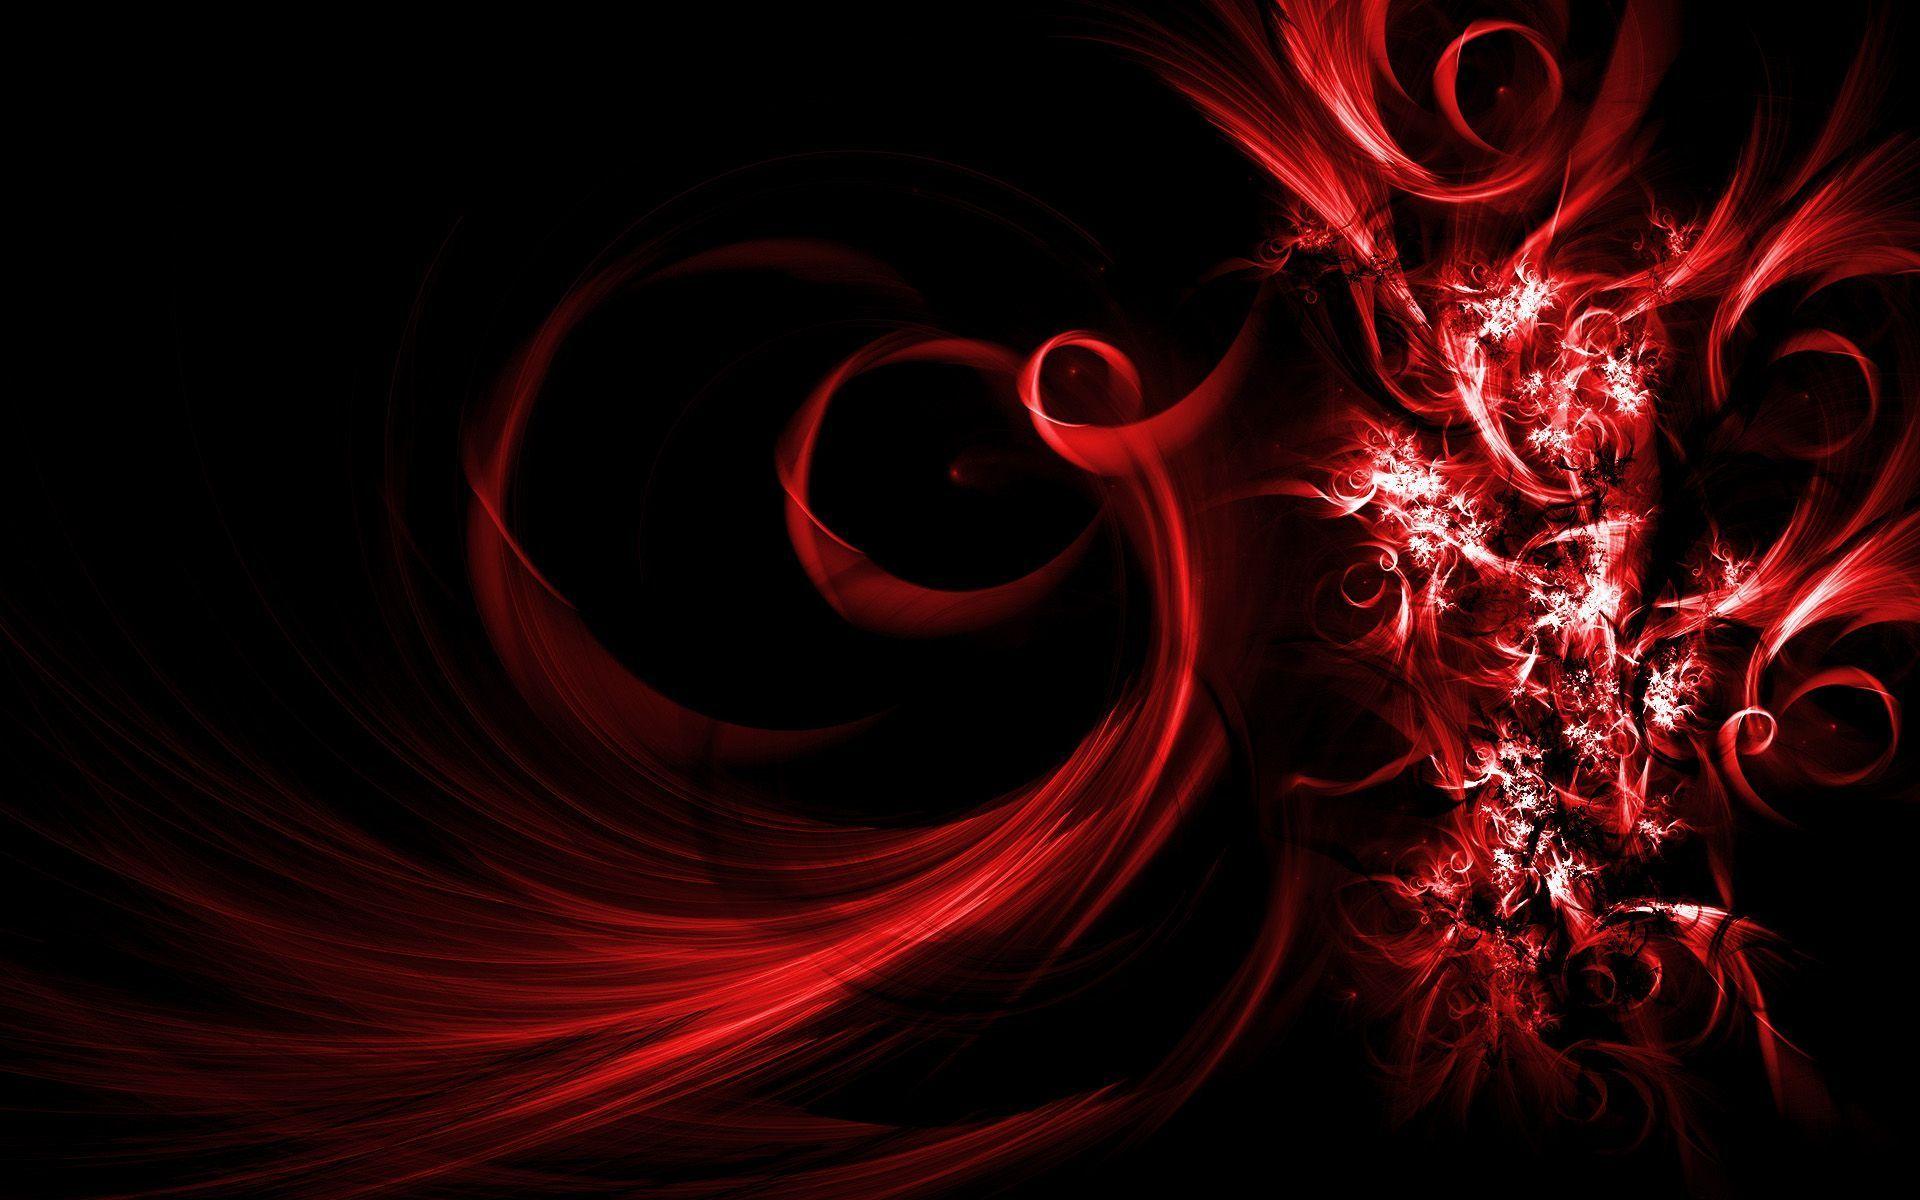 Black And Red Abstract Background 14760 Full HD Wallpaper Desktop